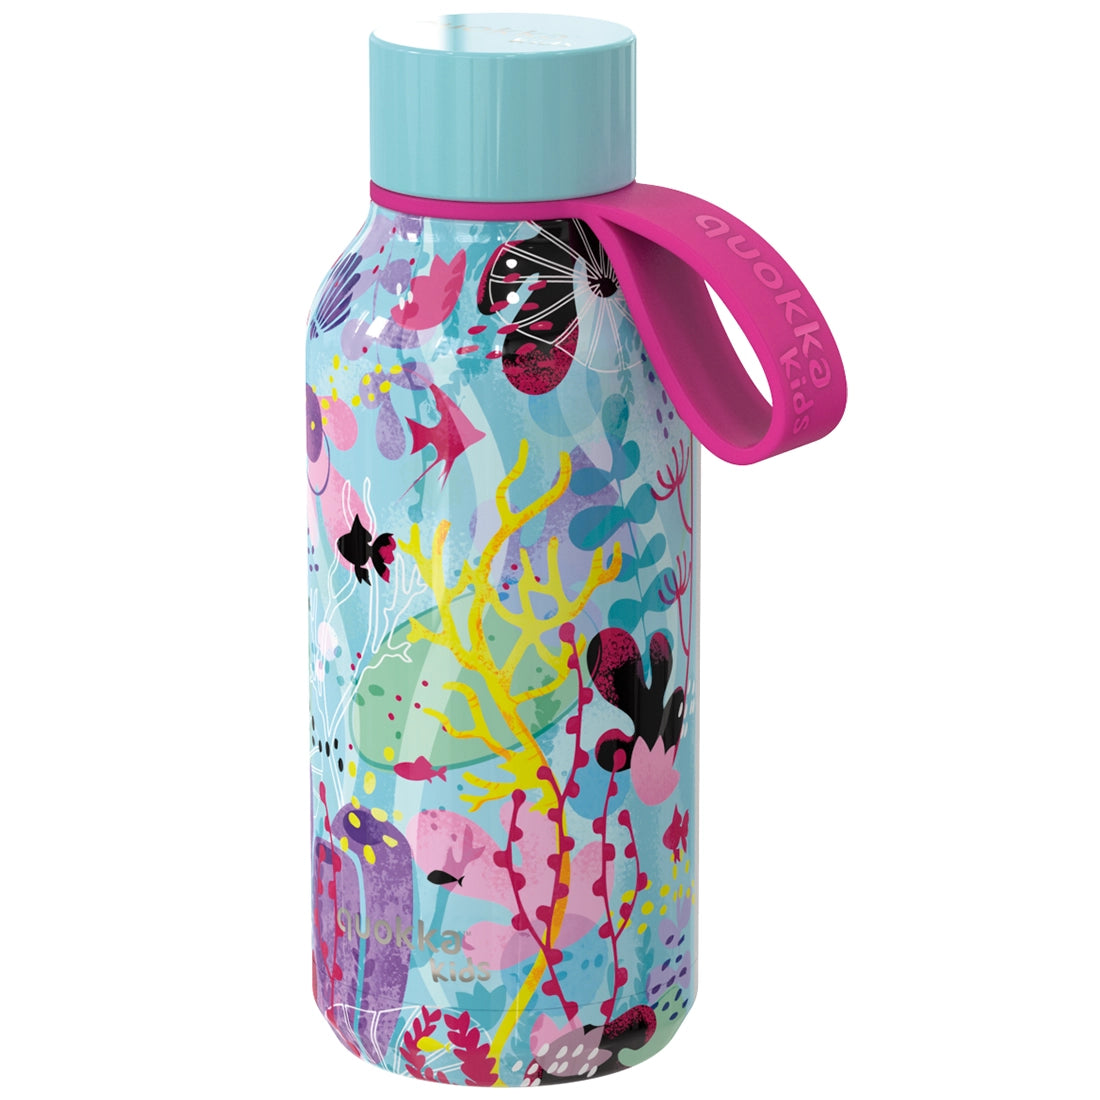 Quokka - Kids Thermal Bottle With Strap - 330ml